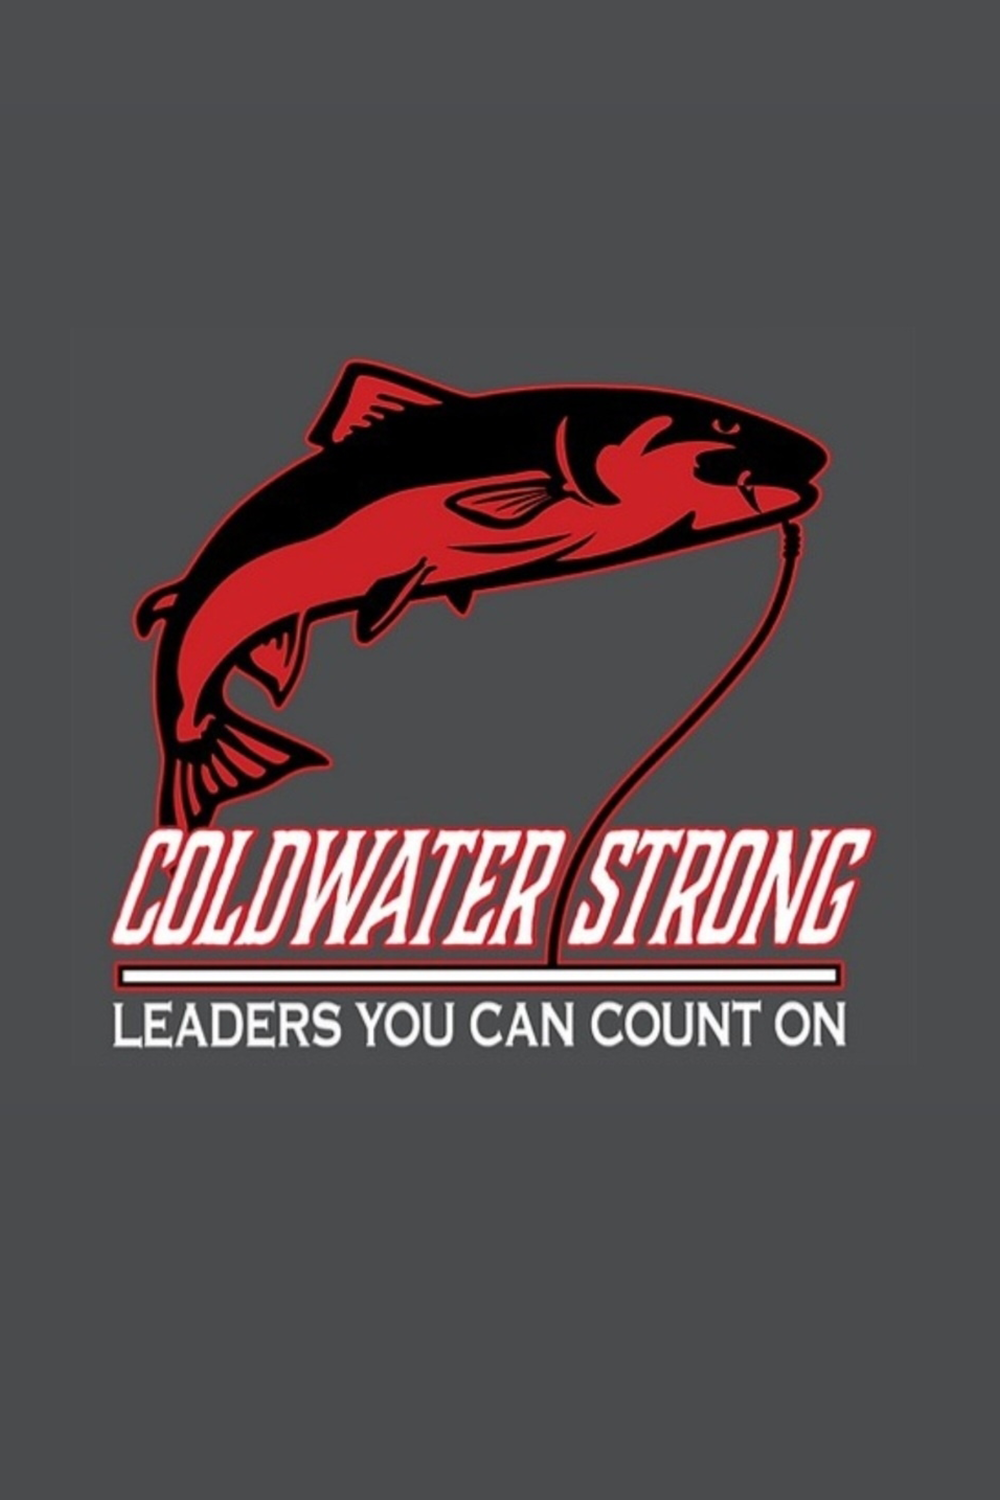 4" Wobbler Float - Coldwater Strong